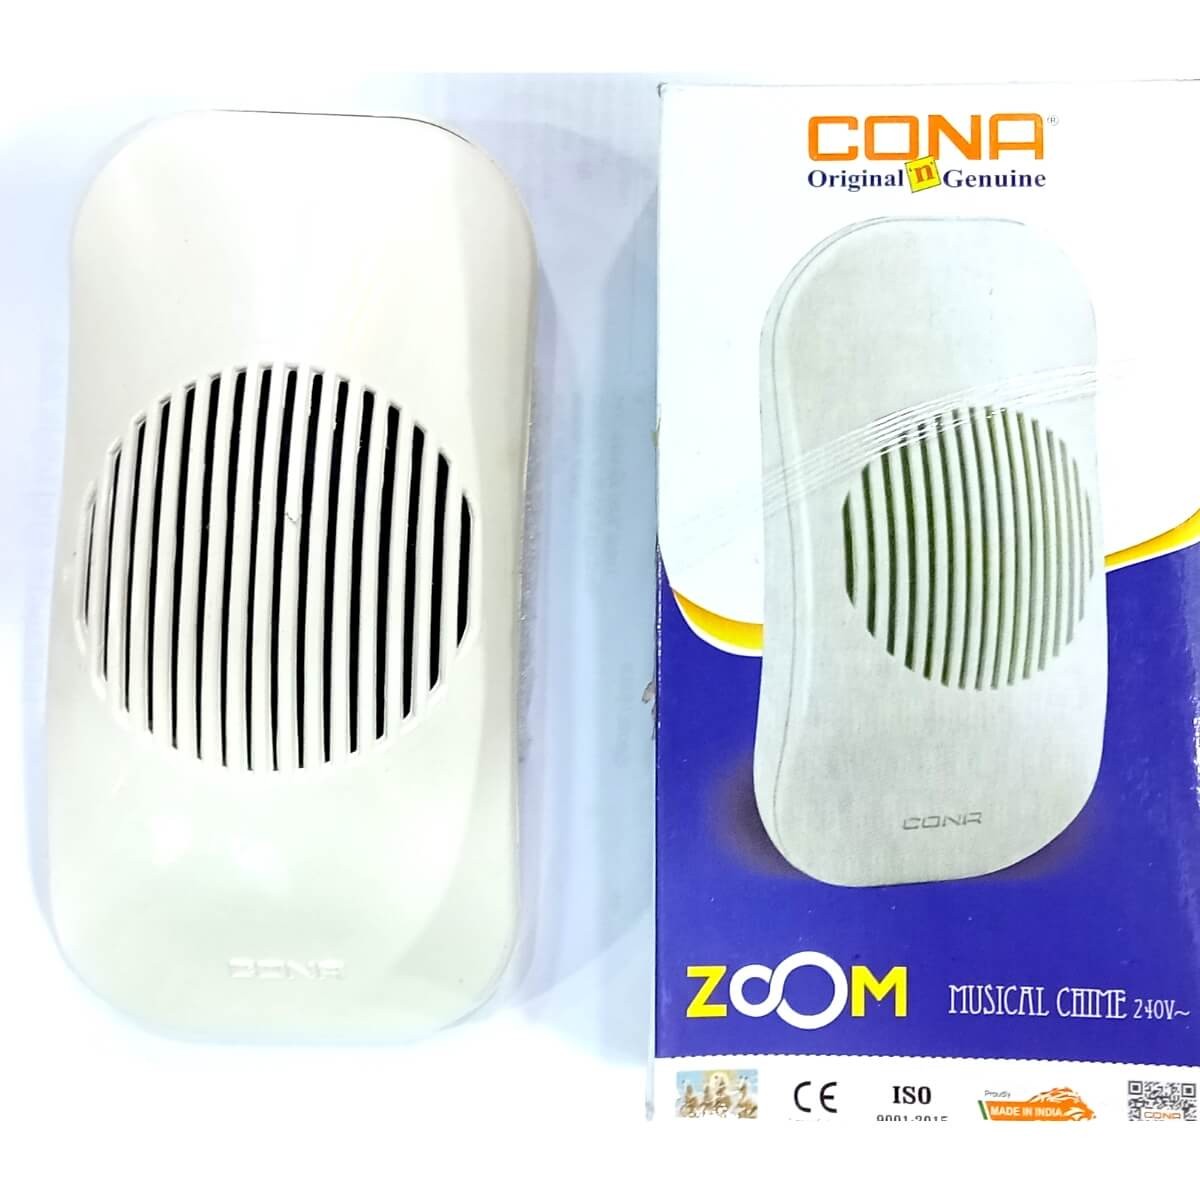 Cona Zoom Musical Chime 240V Calling Bell BD